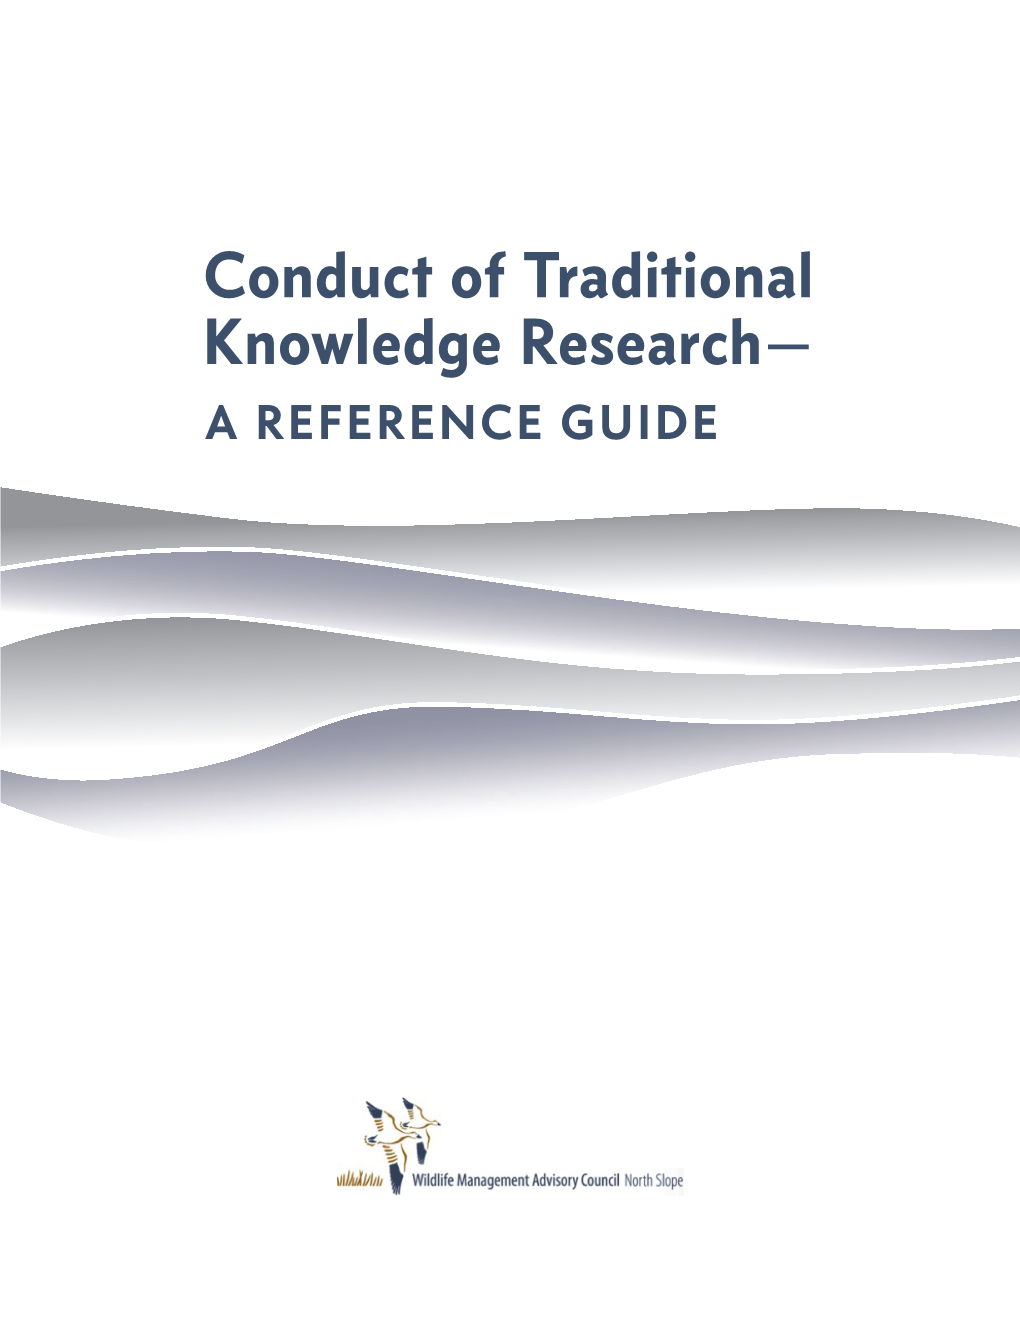 Conduct of Traditional Knowledge Research 1.19 MB